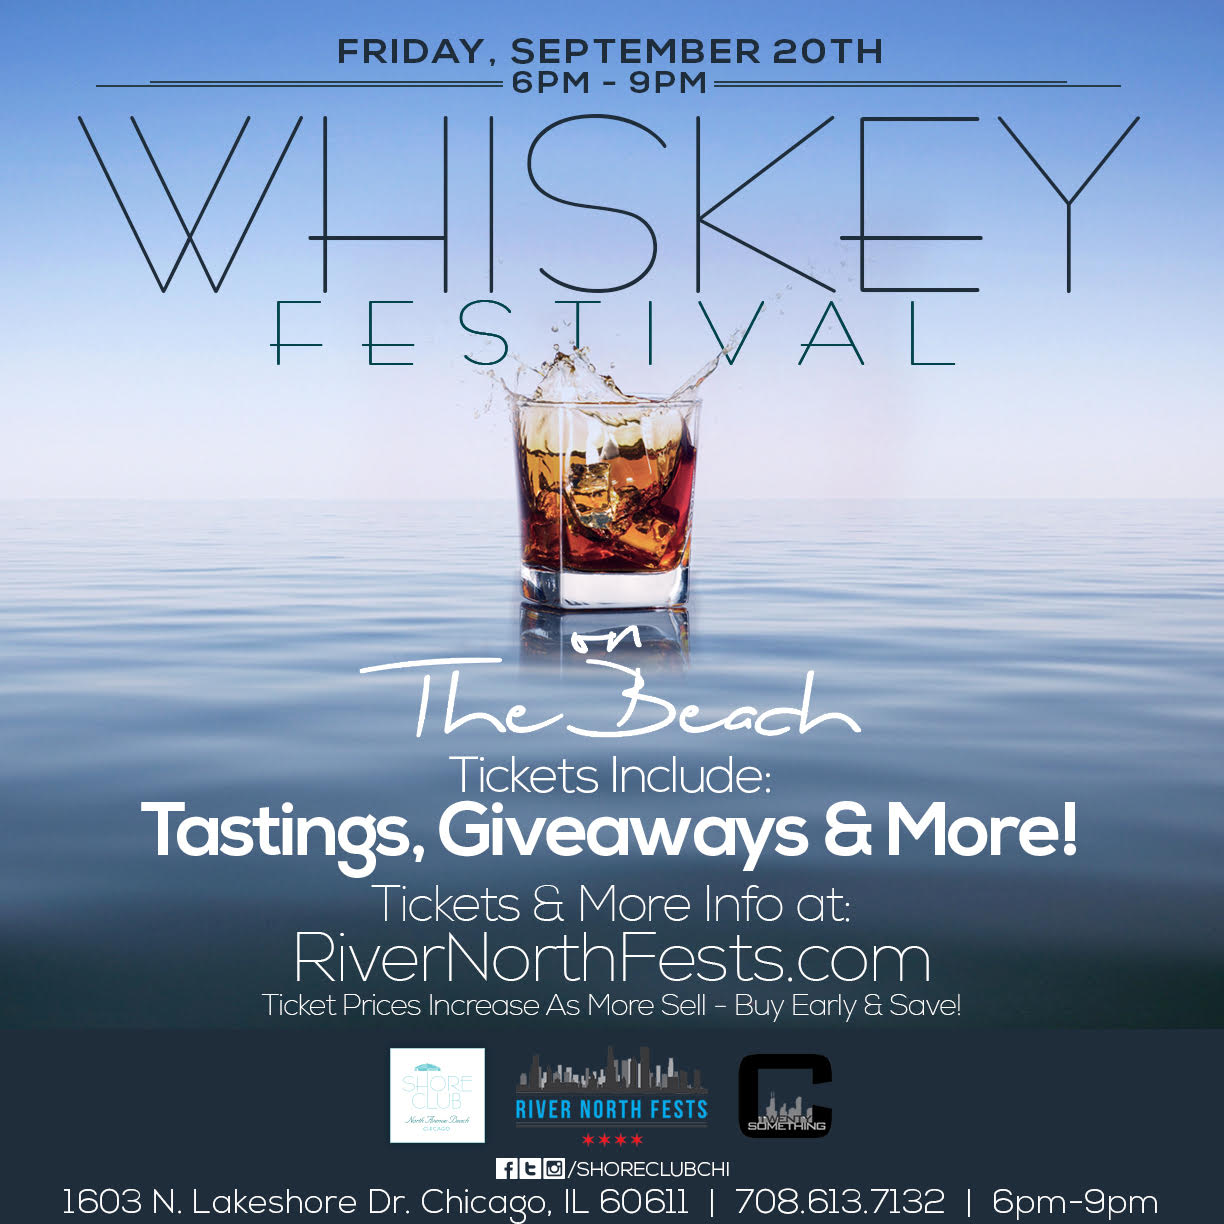 Whiskey Festival on the Beach Party - Tickets include whiskey tastings, giveaways & MORE! We will have a variety of different  whiskeys available for sampling!